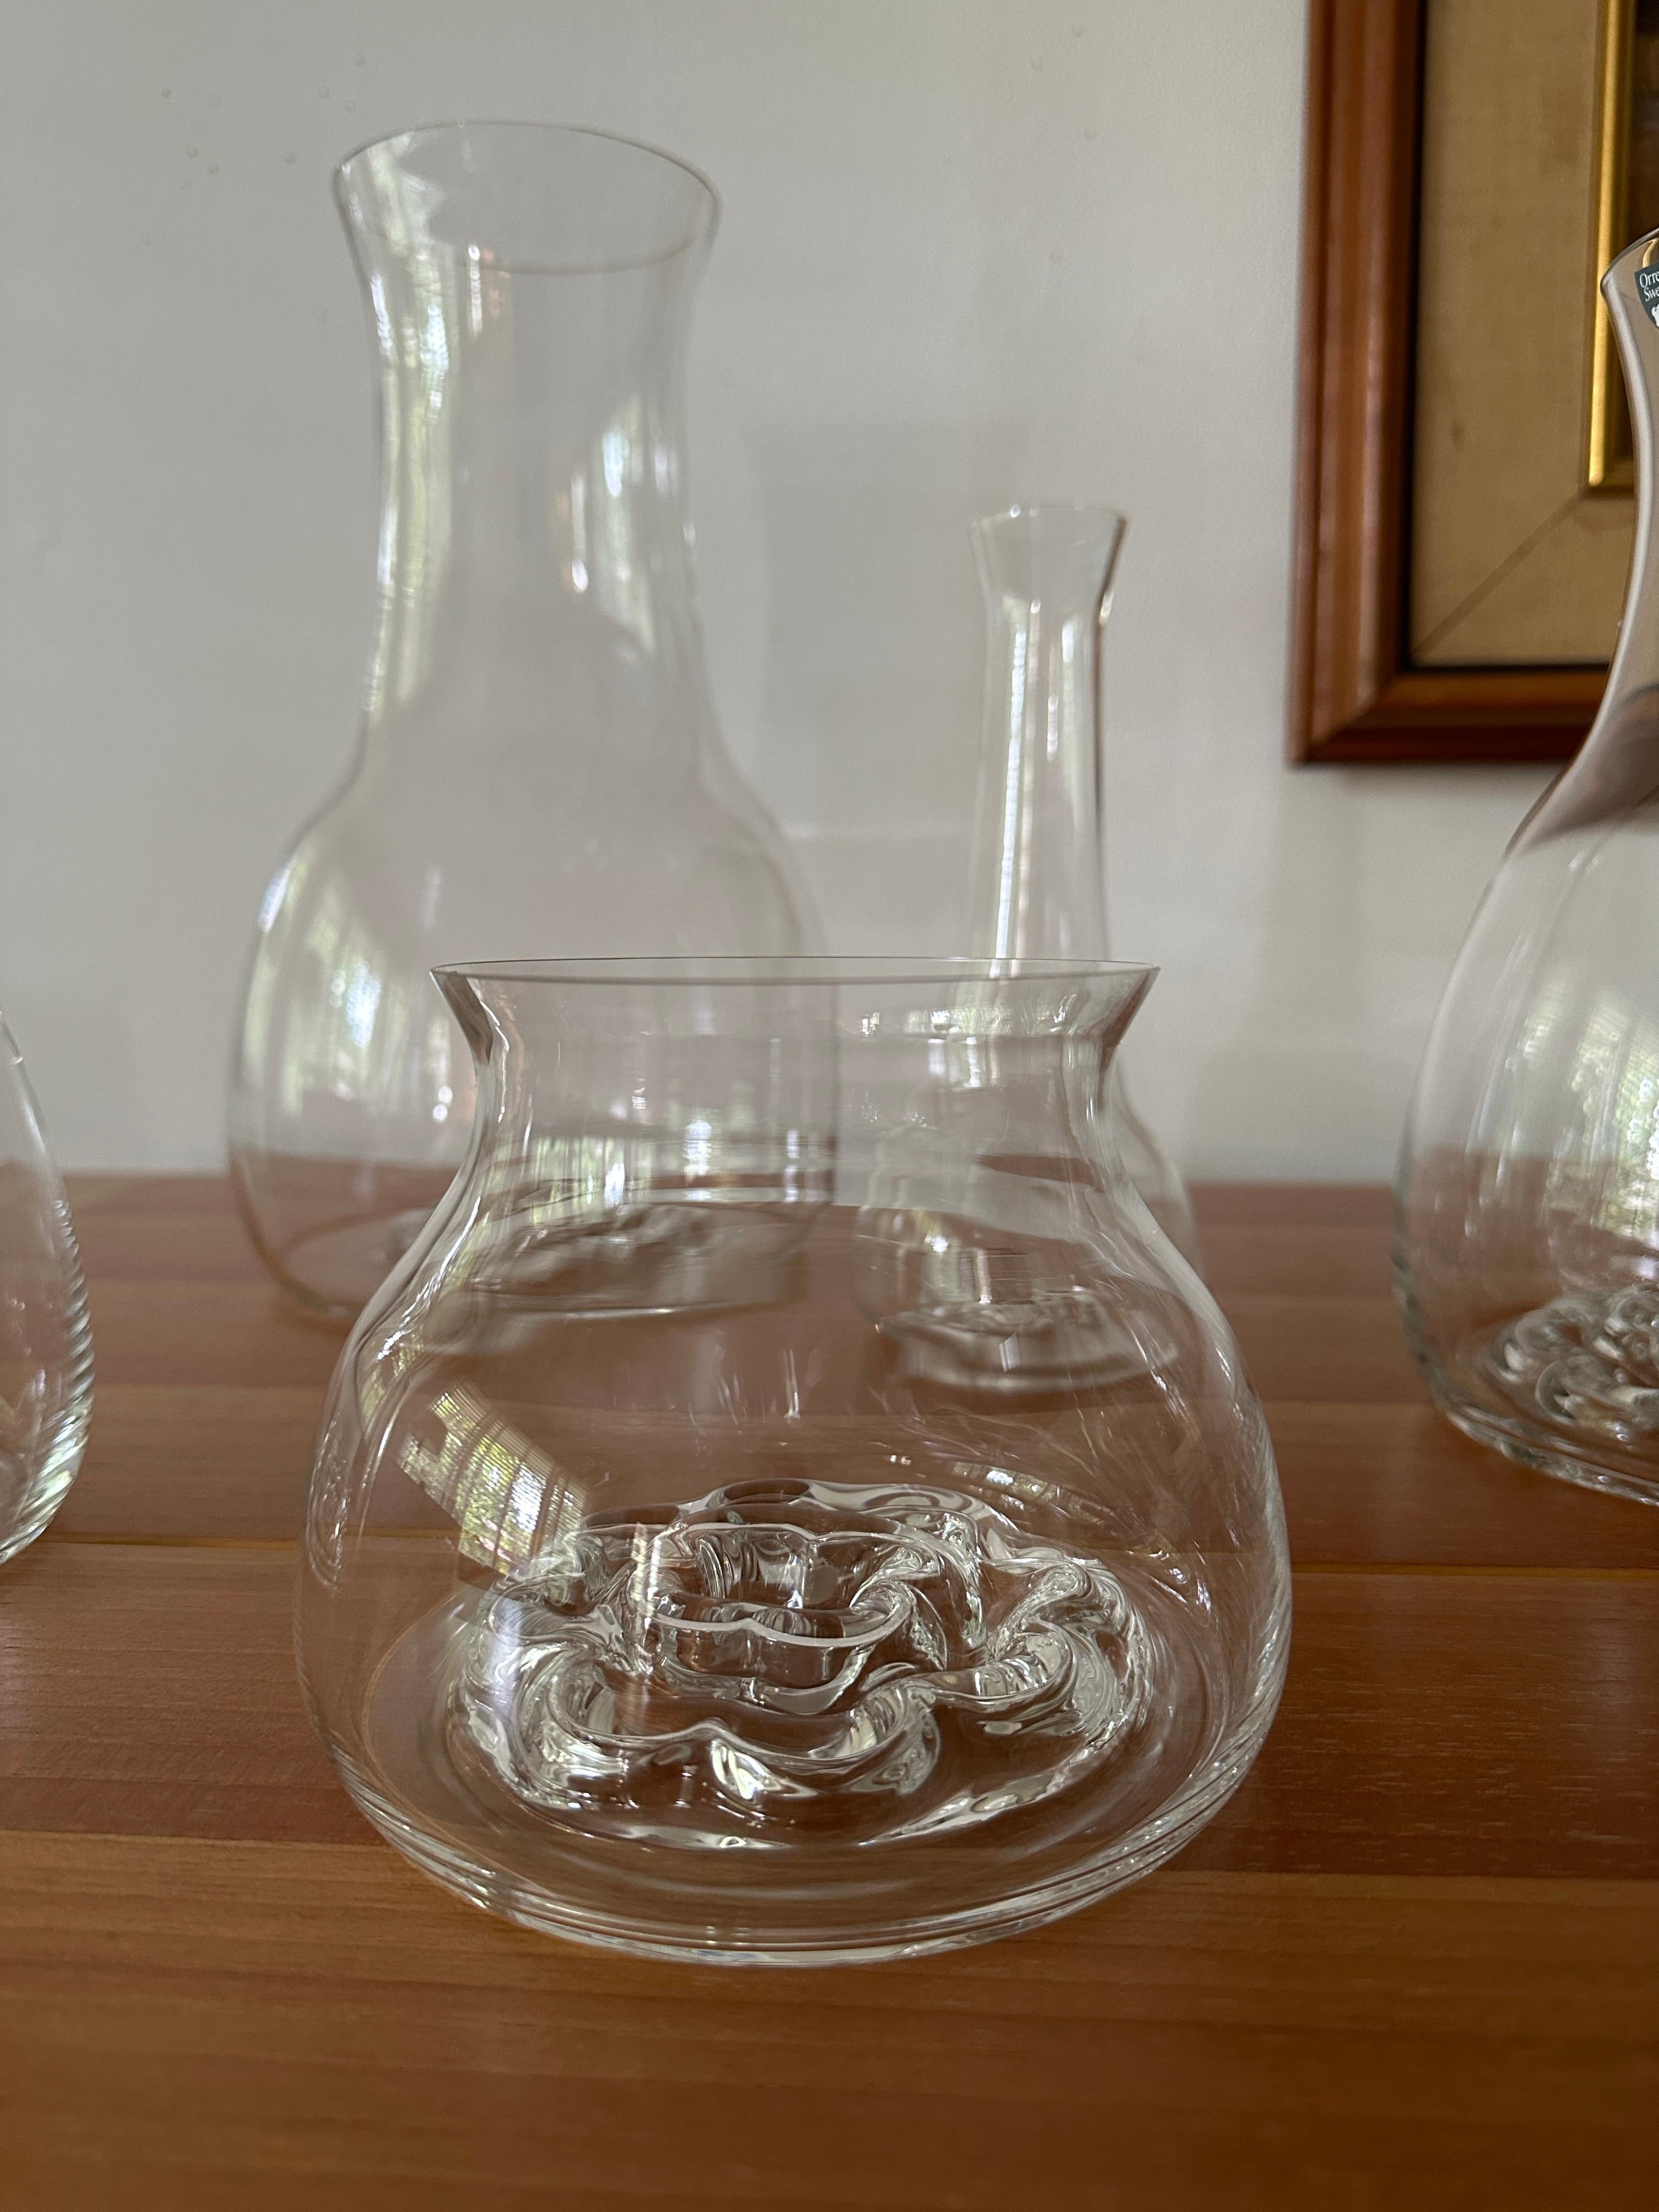 Six Clear Olle Alberius Designed Vases From Orrefors For Sale 2